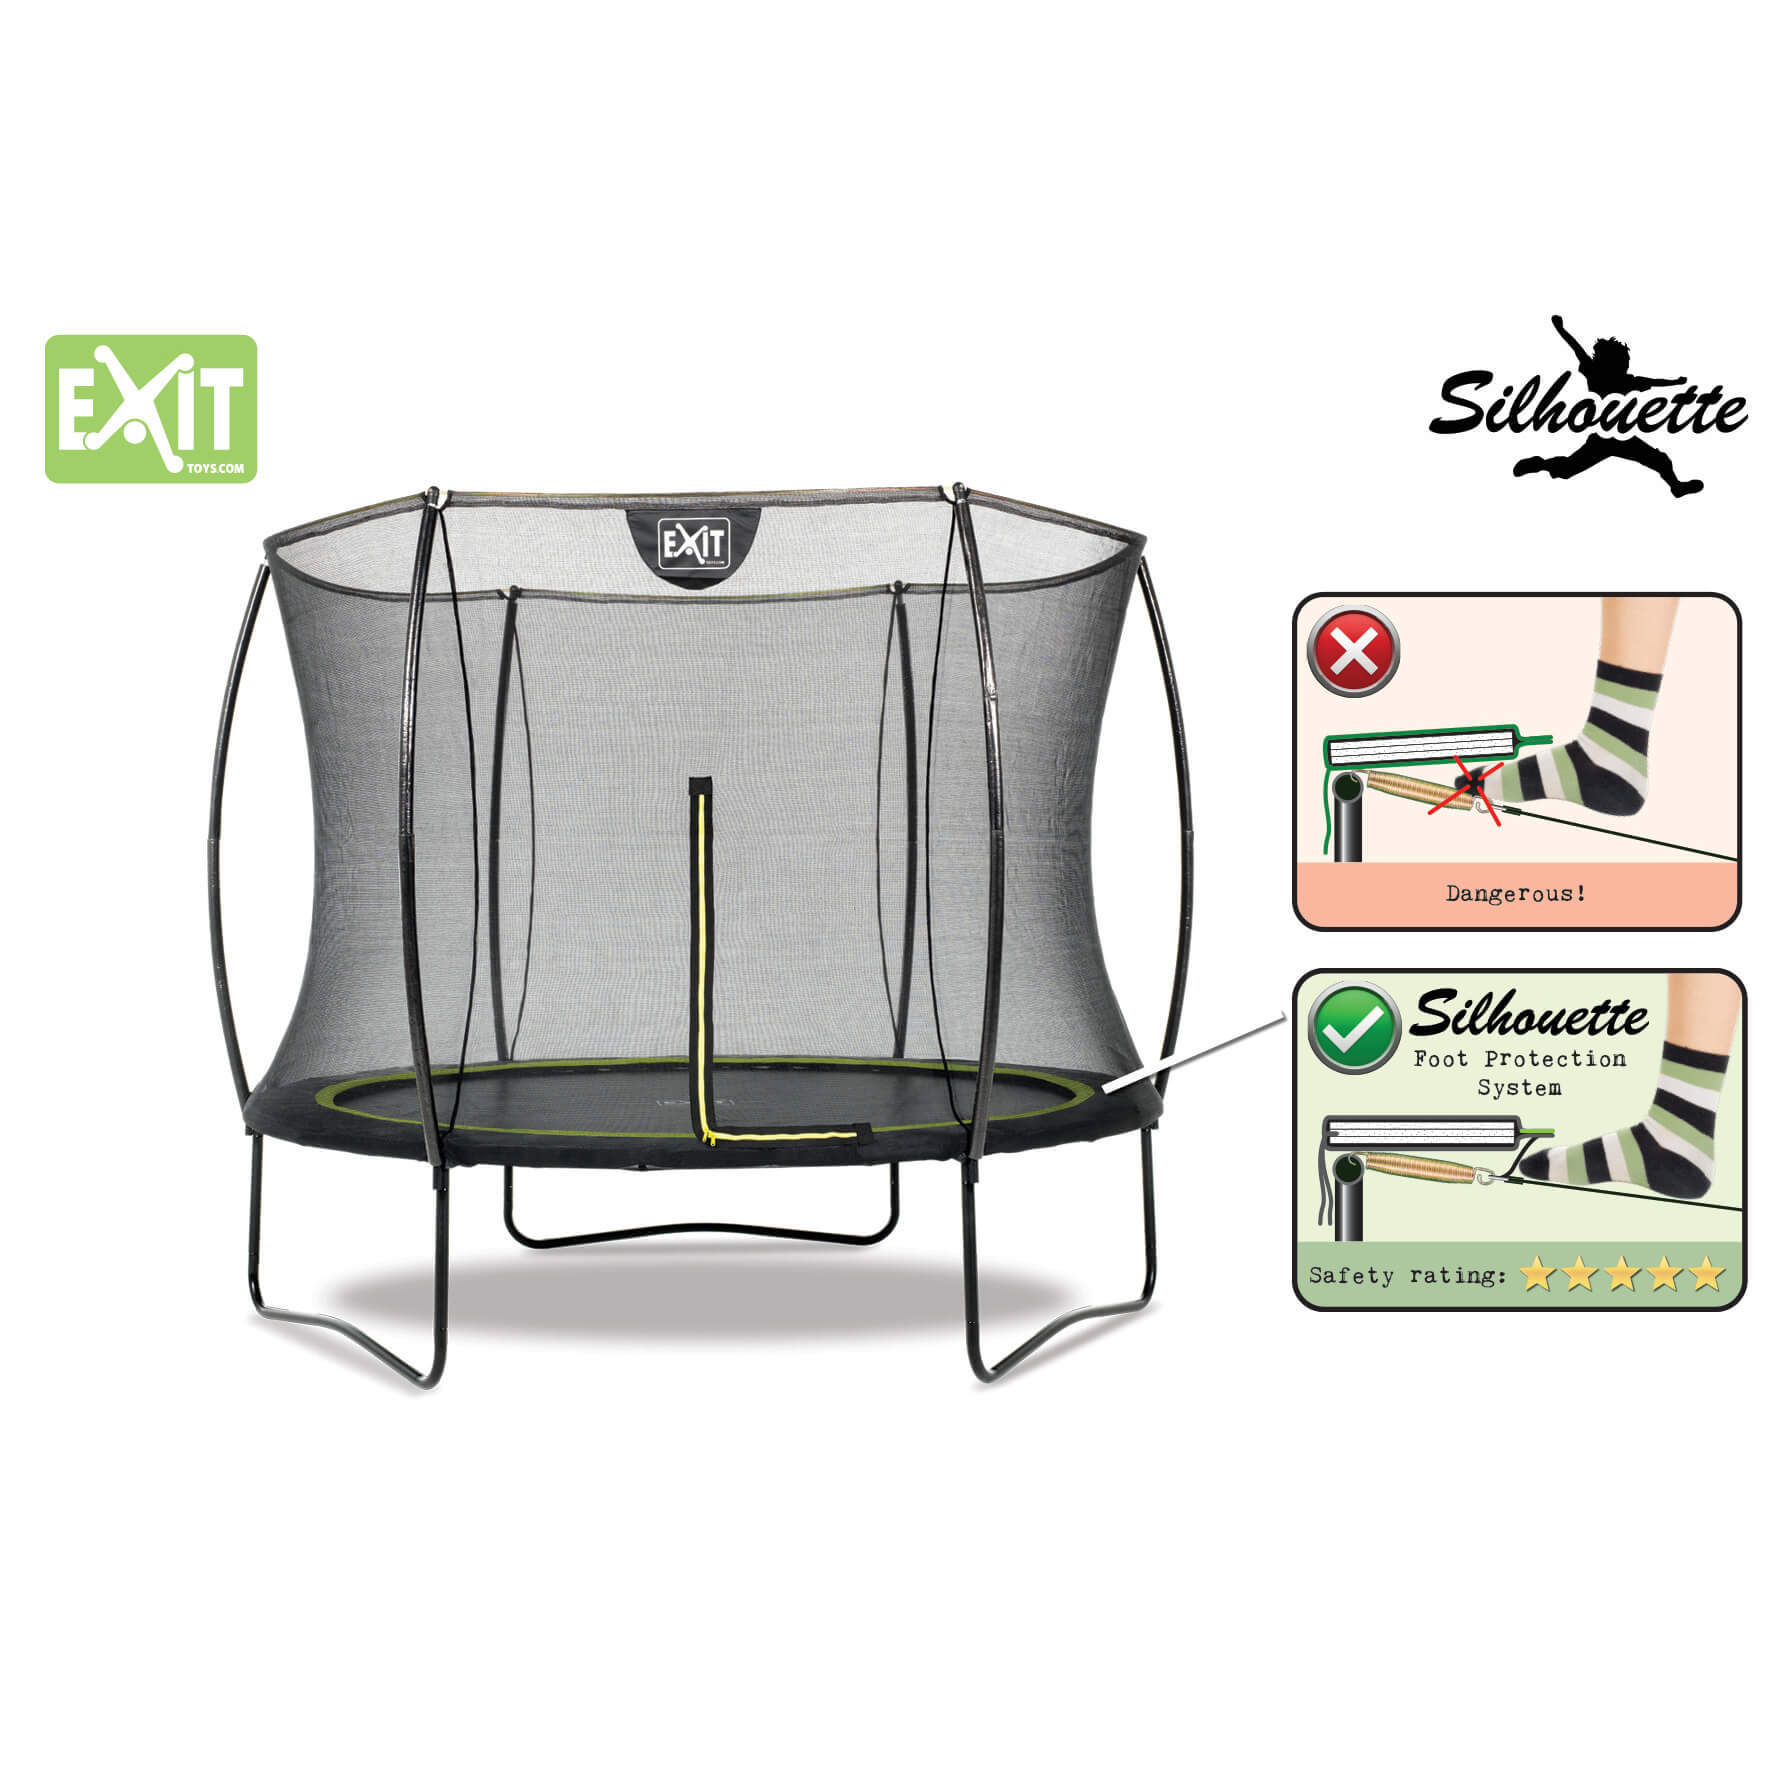 EXIT Toys Silhouette Trampoline with Safety Net - 10ft